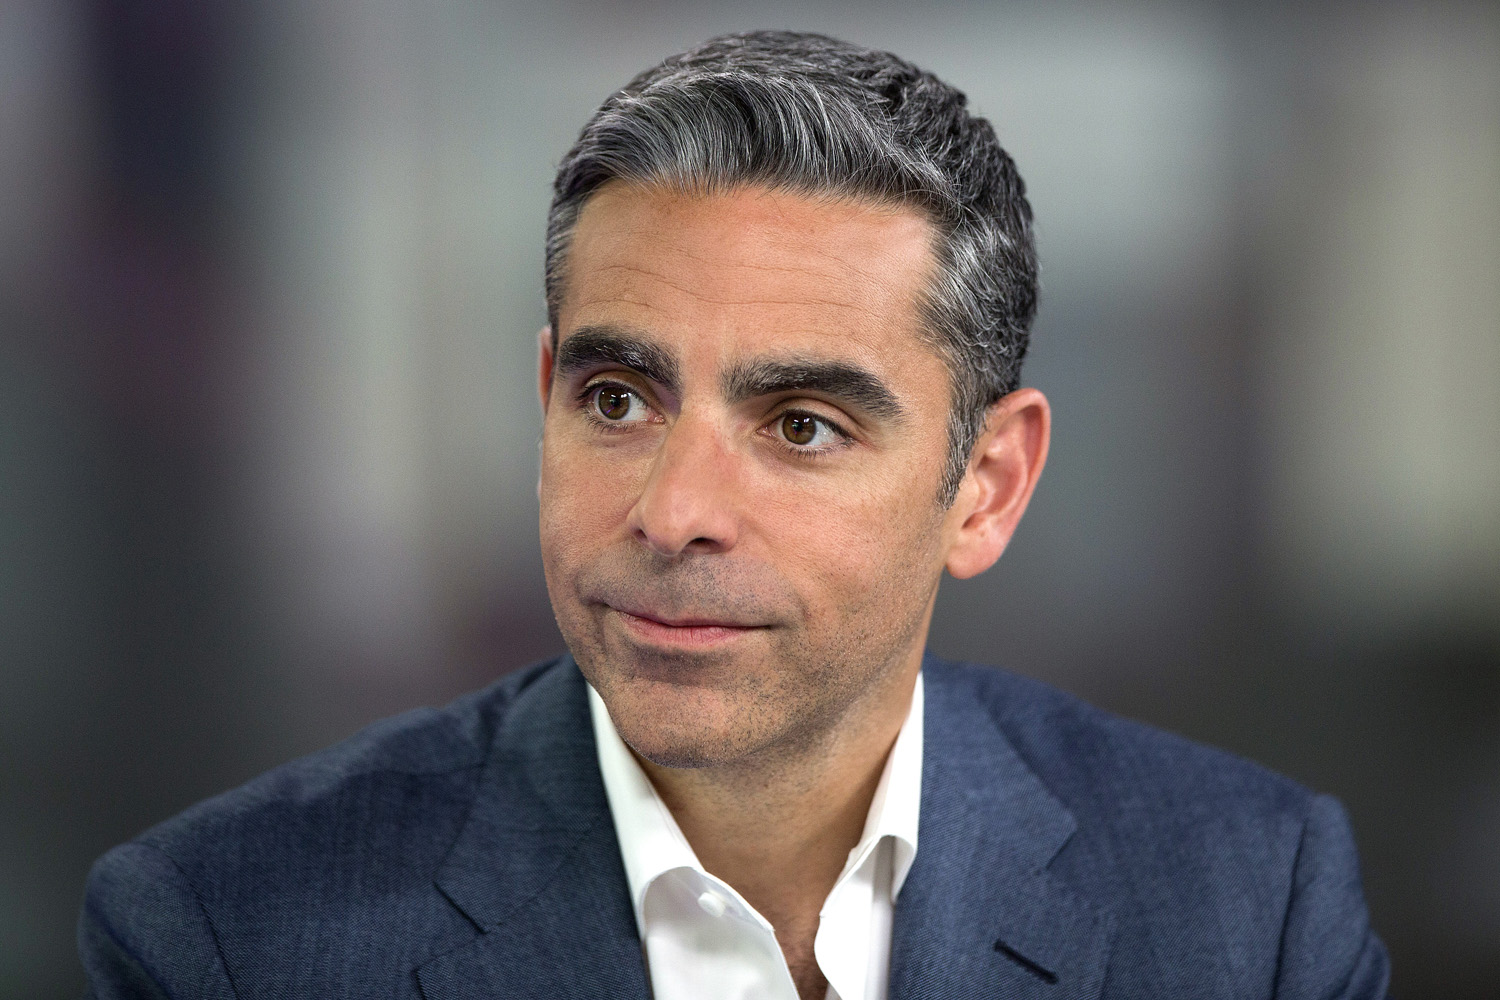 David Marcus, president of PayPal, had his credit card information stolen while in the United Kingdom.